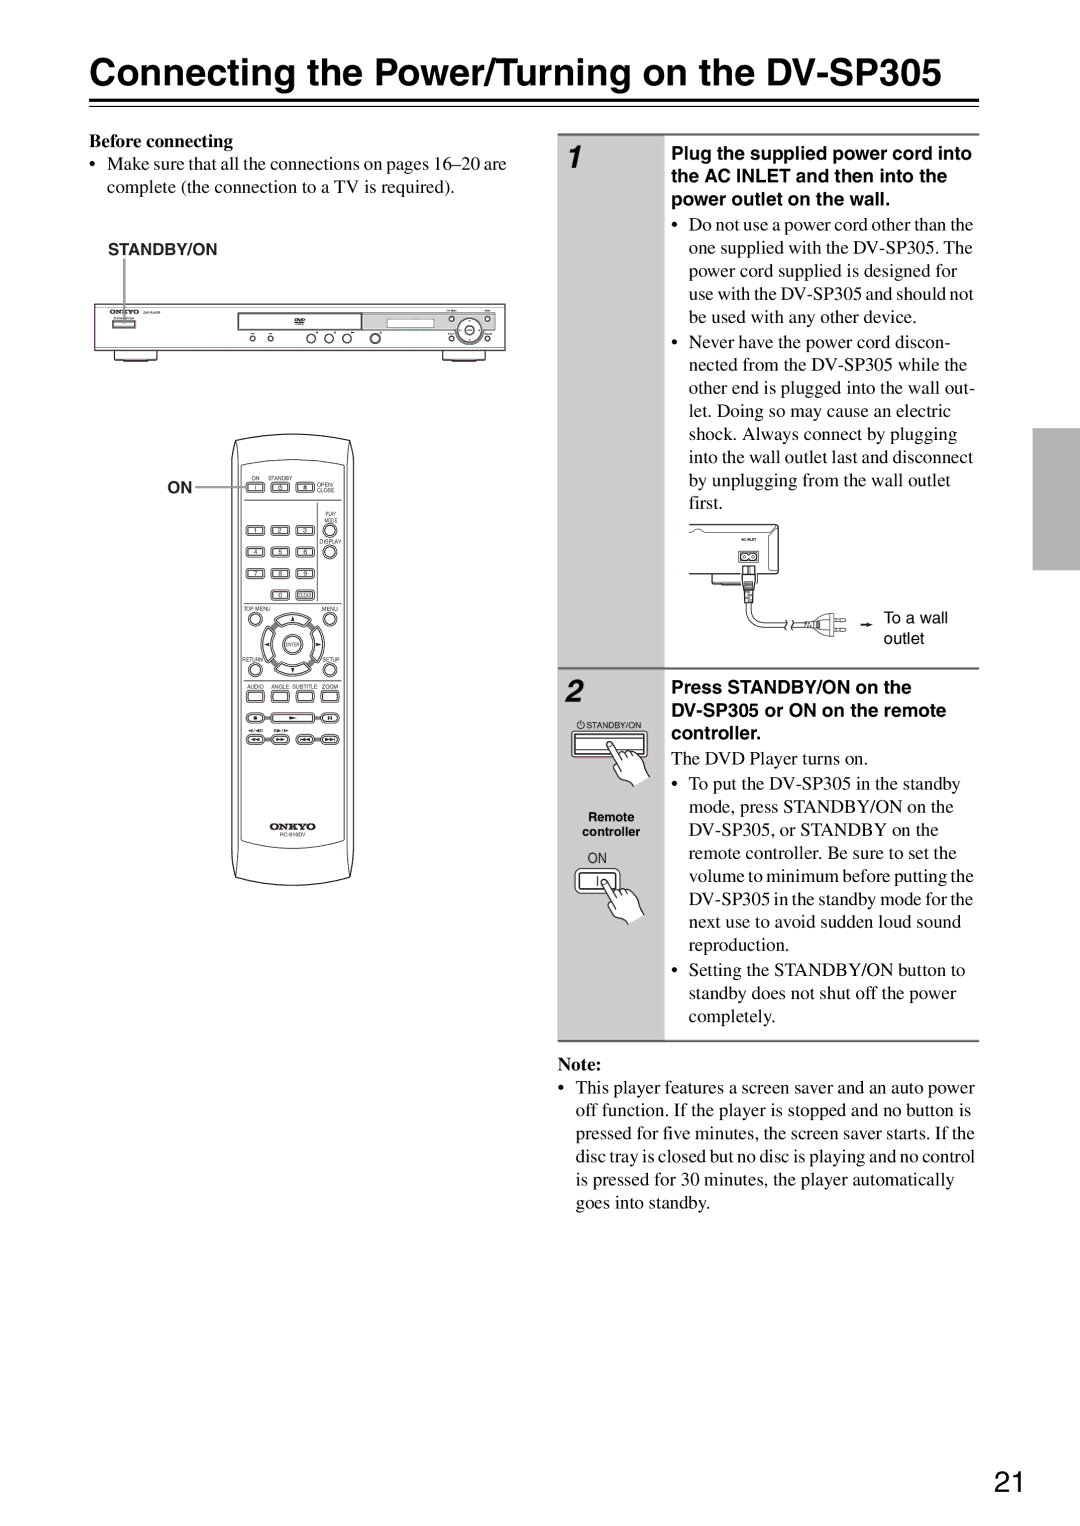 Onkyo instruction manual Connecting the Power/Turning on the DV-SP305 